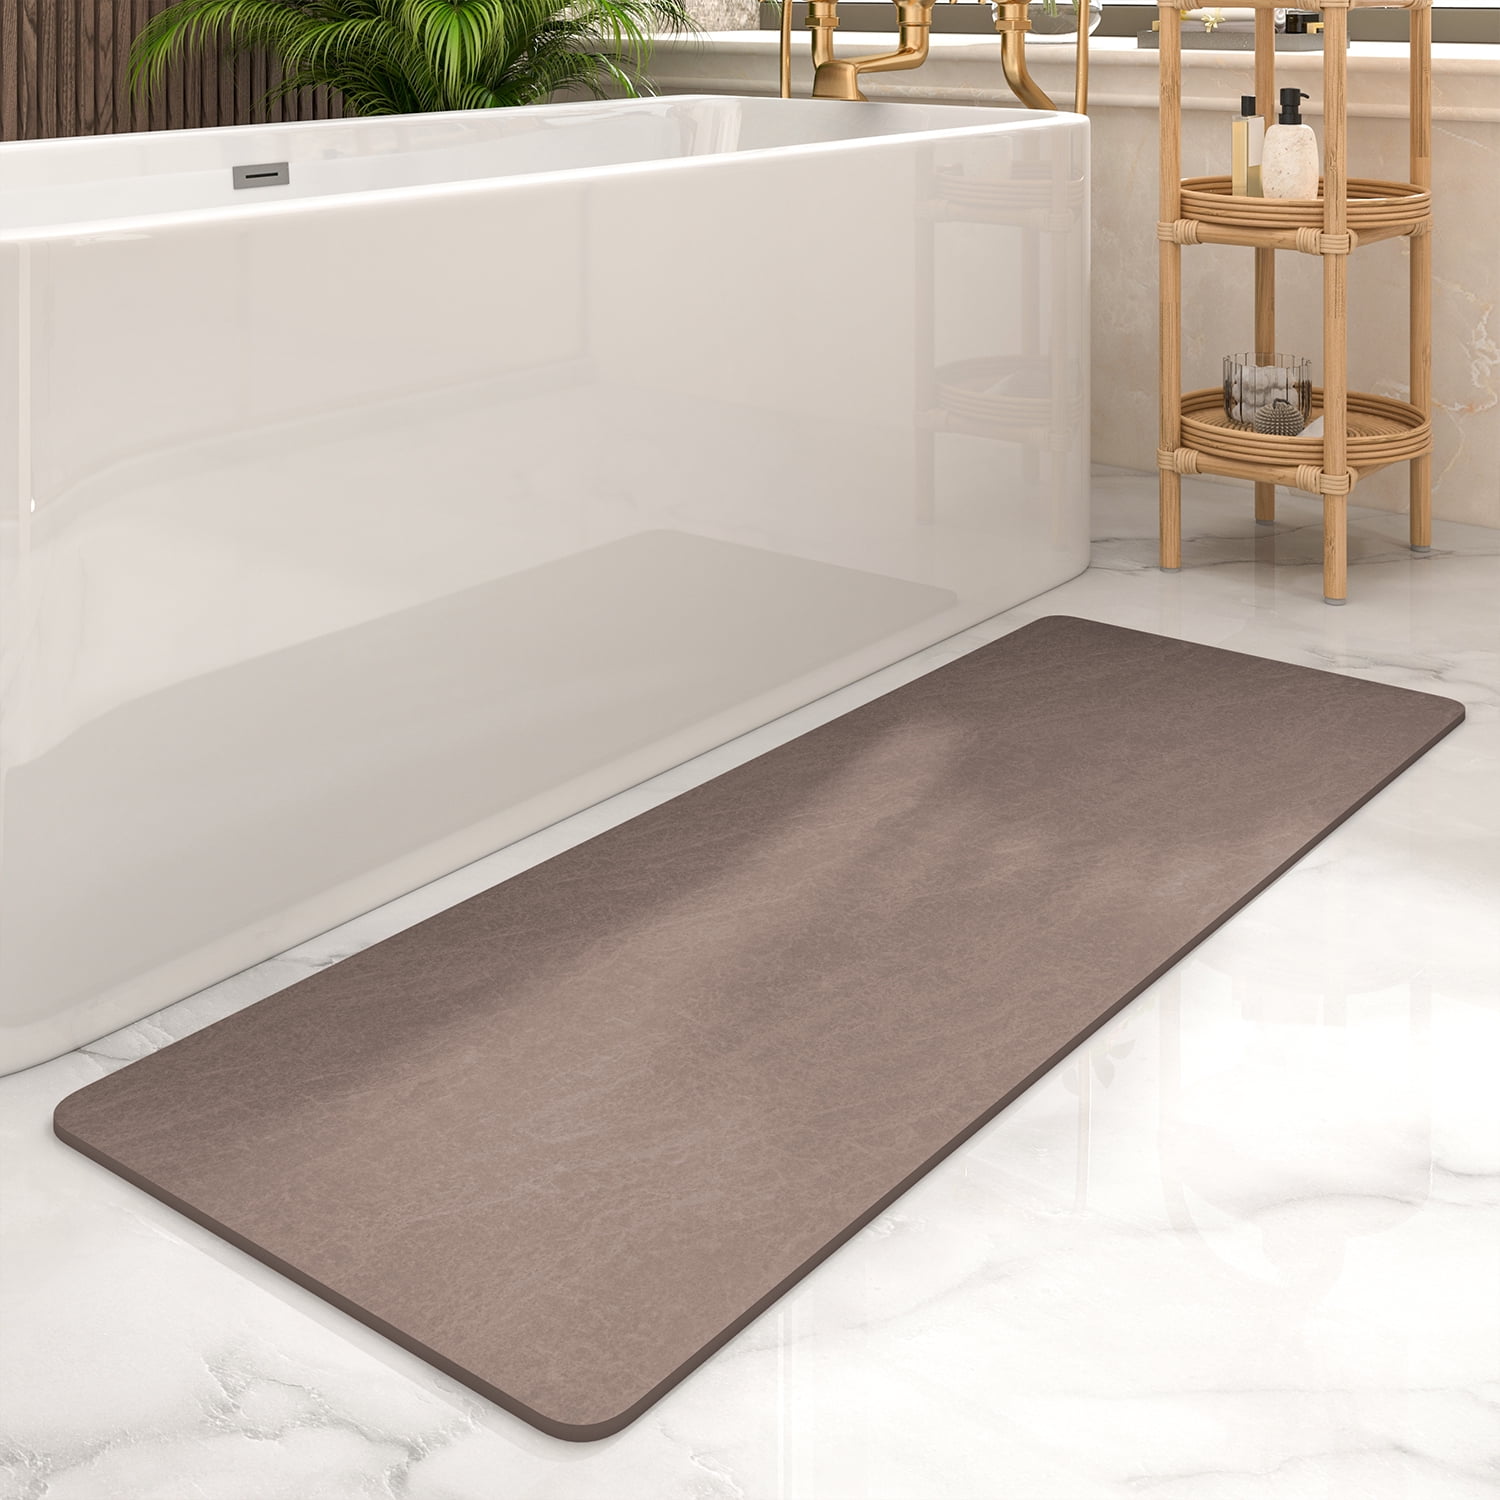 SIXHOME Bath Mats Rugs 24x 48 Quick Dry Bath Mat Brown Bath Rug Super  Absorbent Non Slip Rubber Backed Thin Bathroom Rugs Fit Under Door Washable